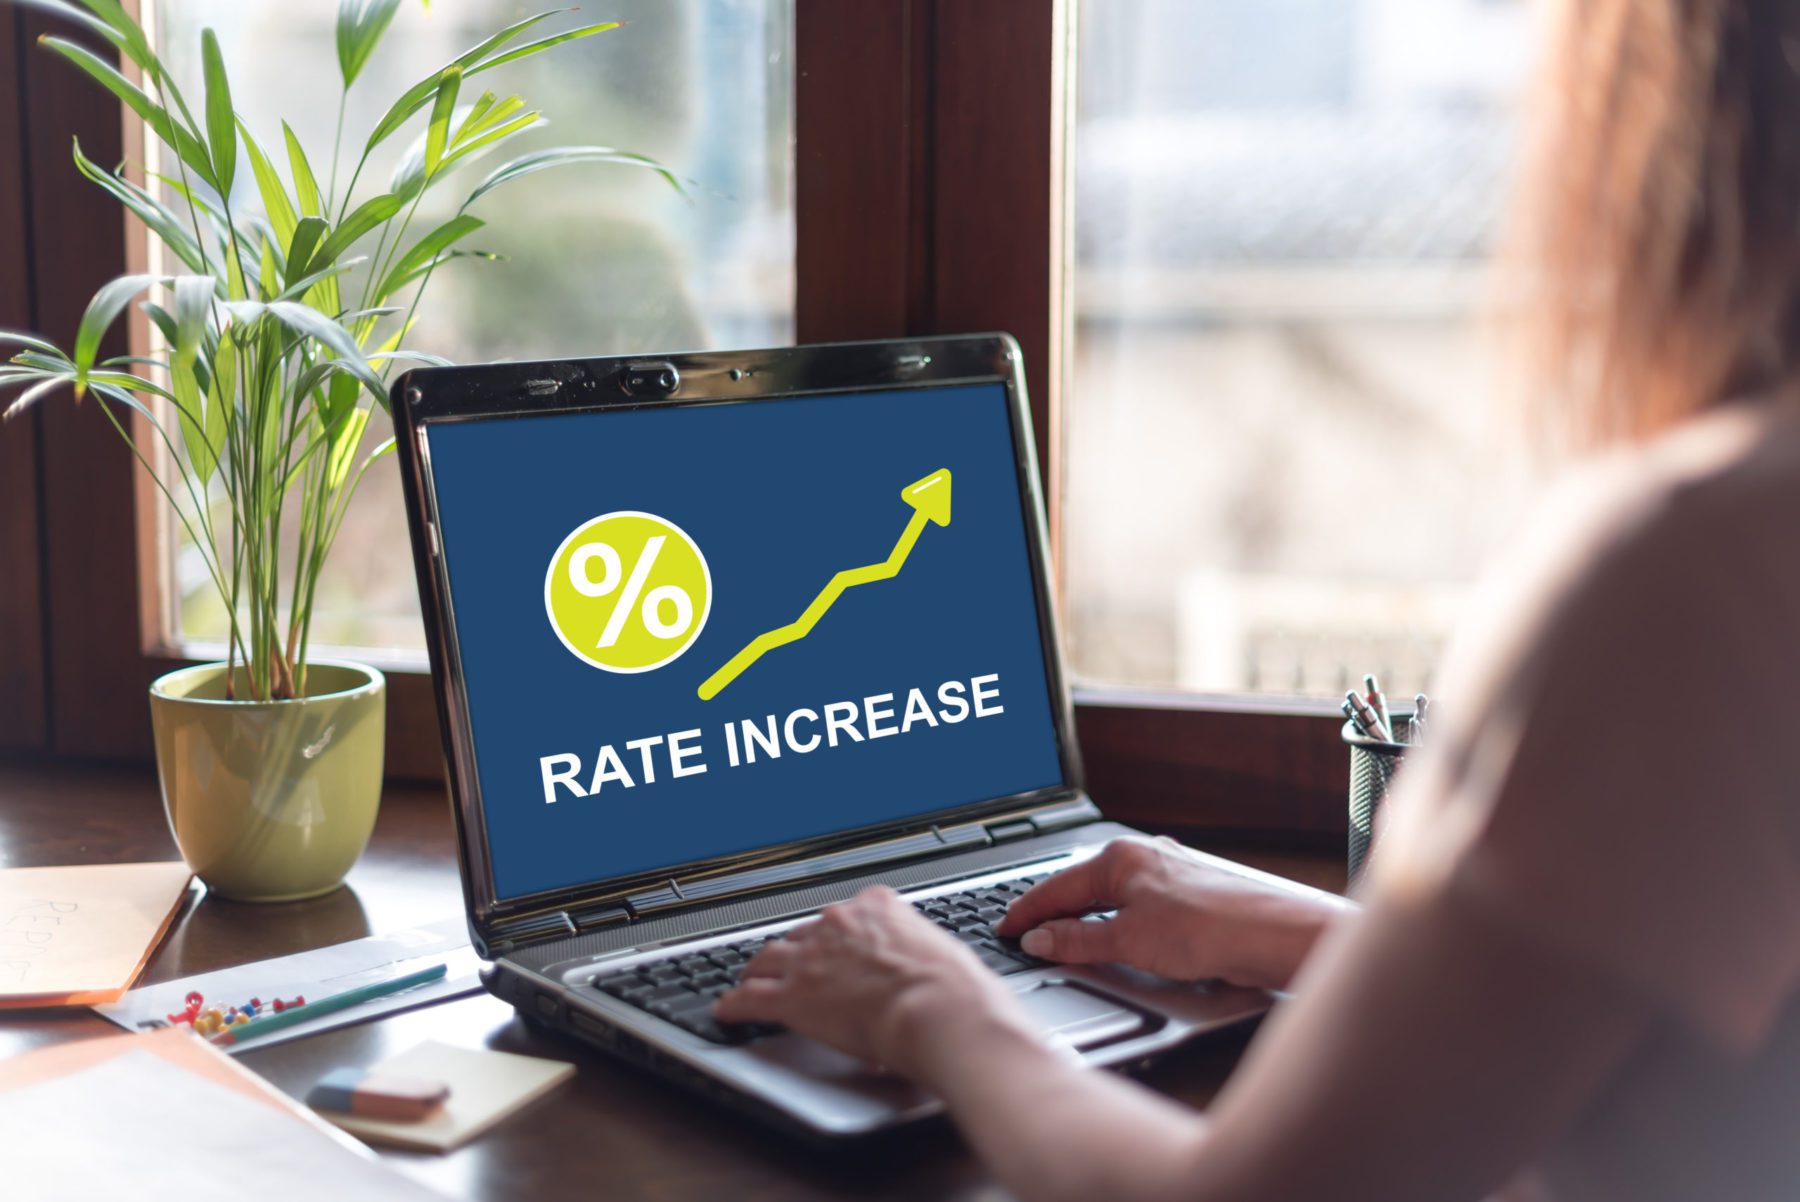 A computer that shows a rate increase on the screen